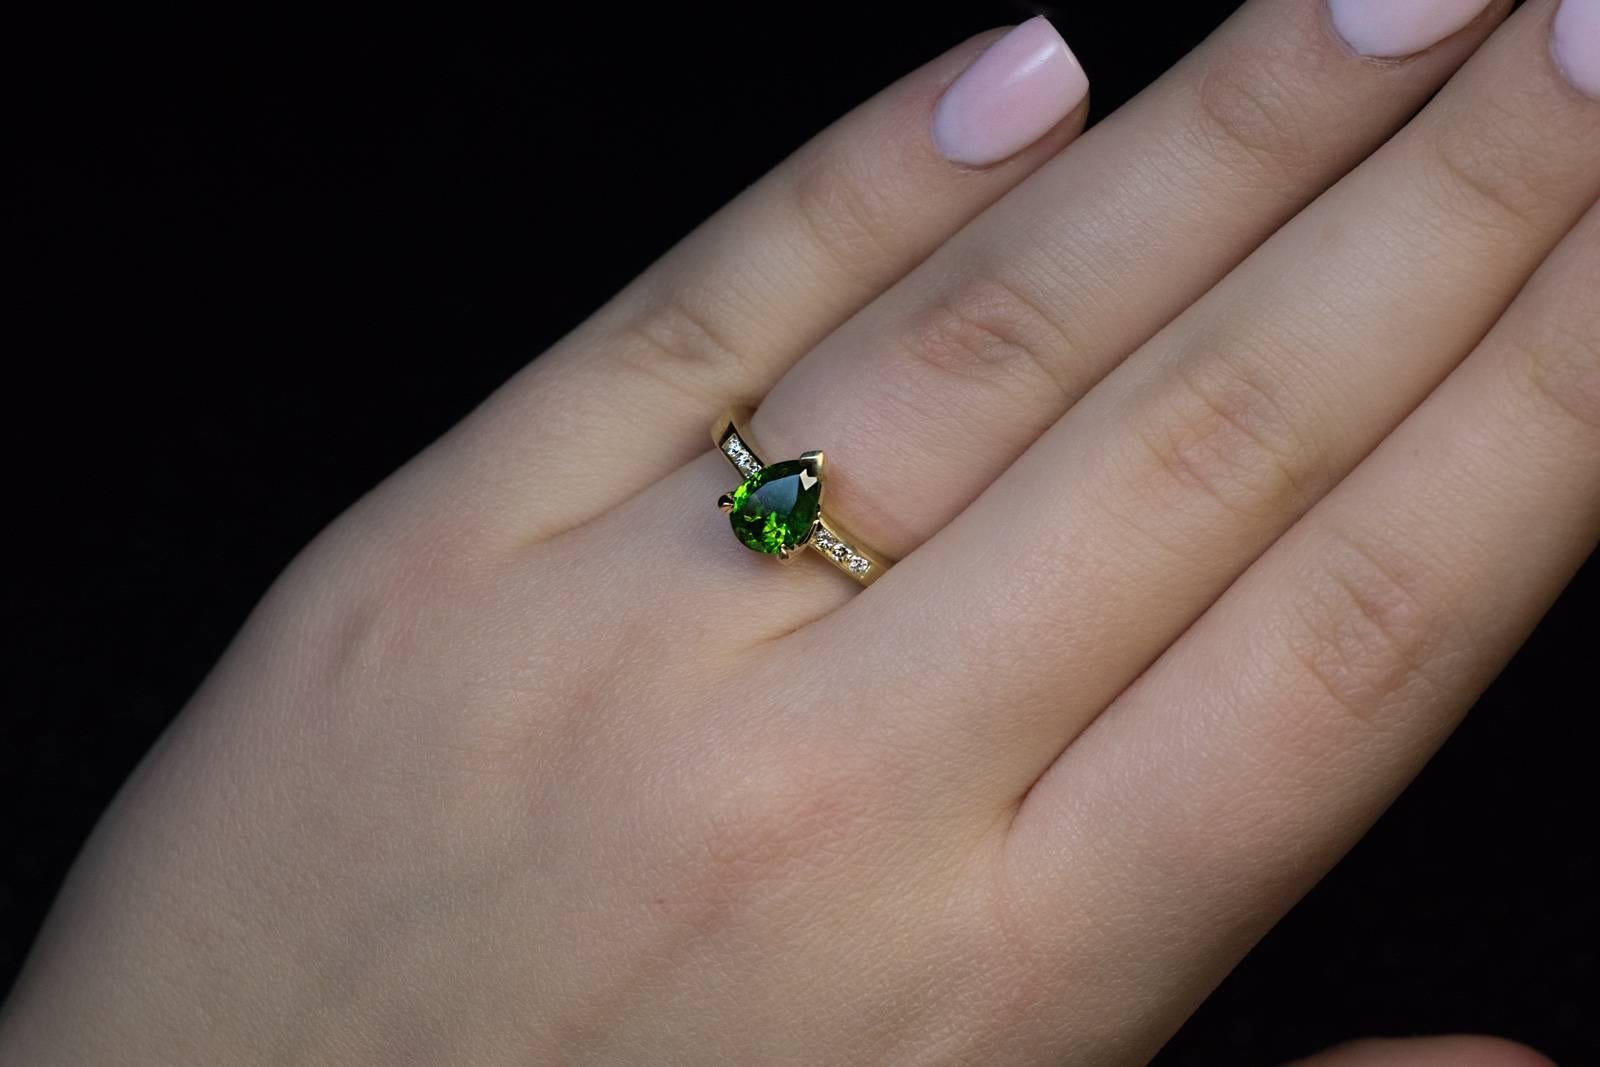 A contemporary 18K gold ring is centered with a grass green 1.45 ct pear cut Russian demantoid garnet flanked by bright white (F color) diamonds.

The demantoid has some fine “horsetails”, a unique feature of demantoids mined in the Ural